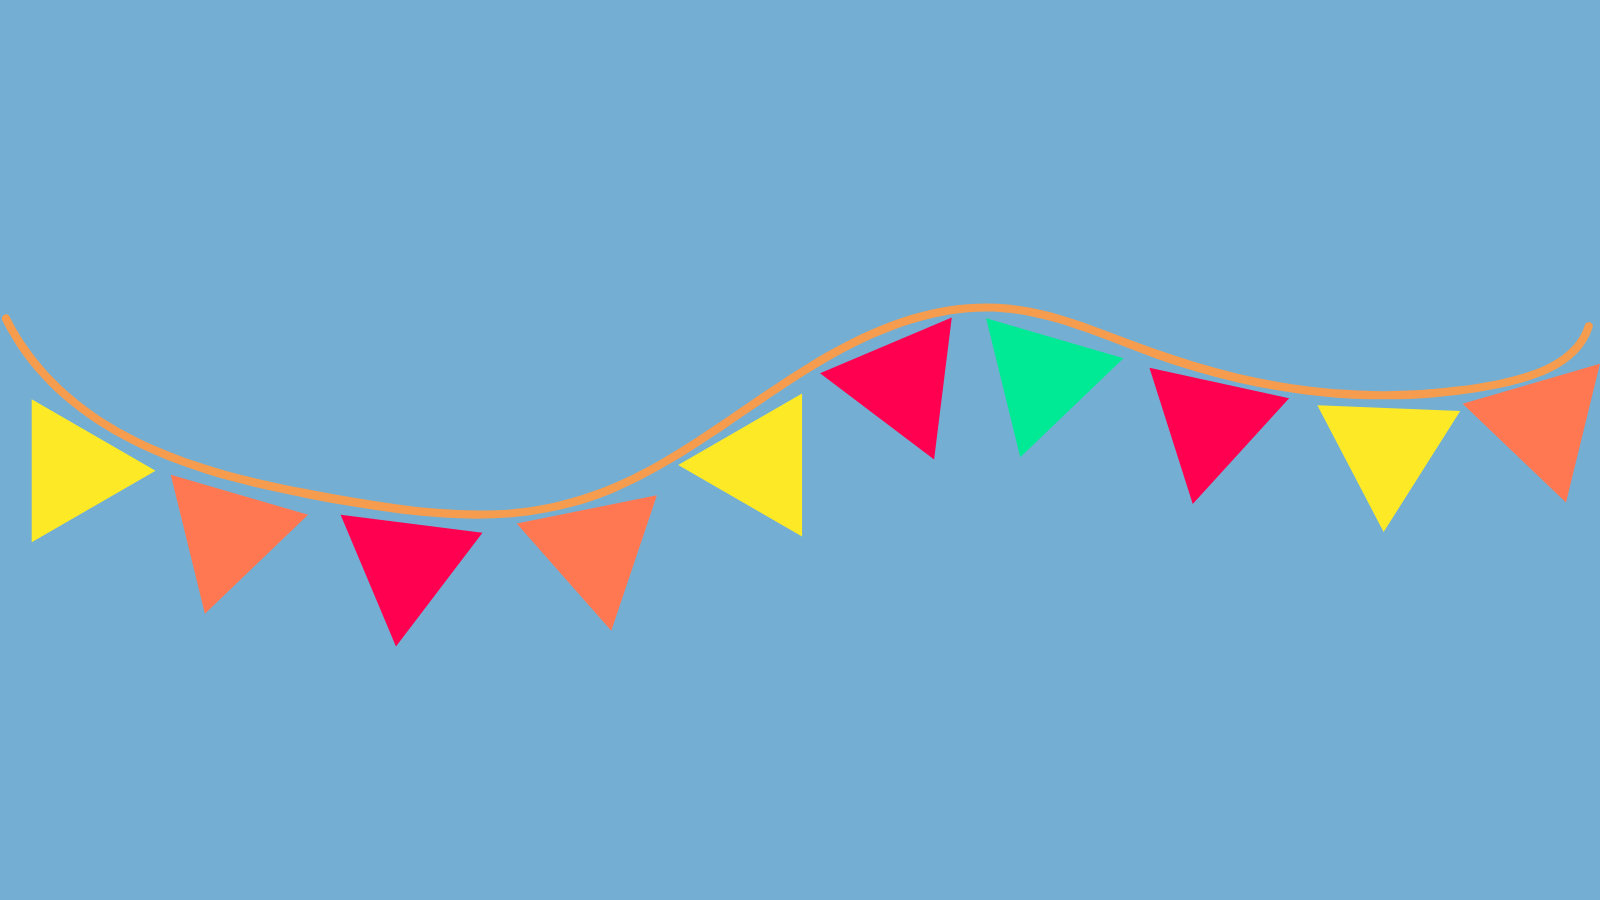 A string of small triangular flags in different colors